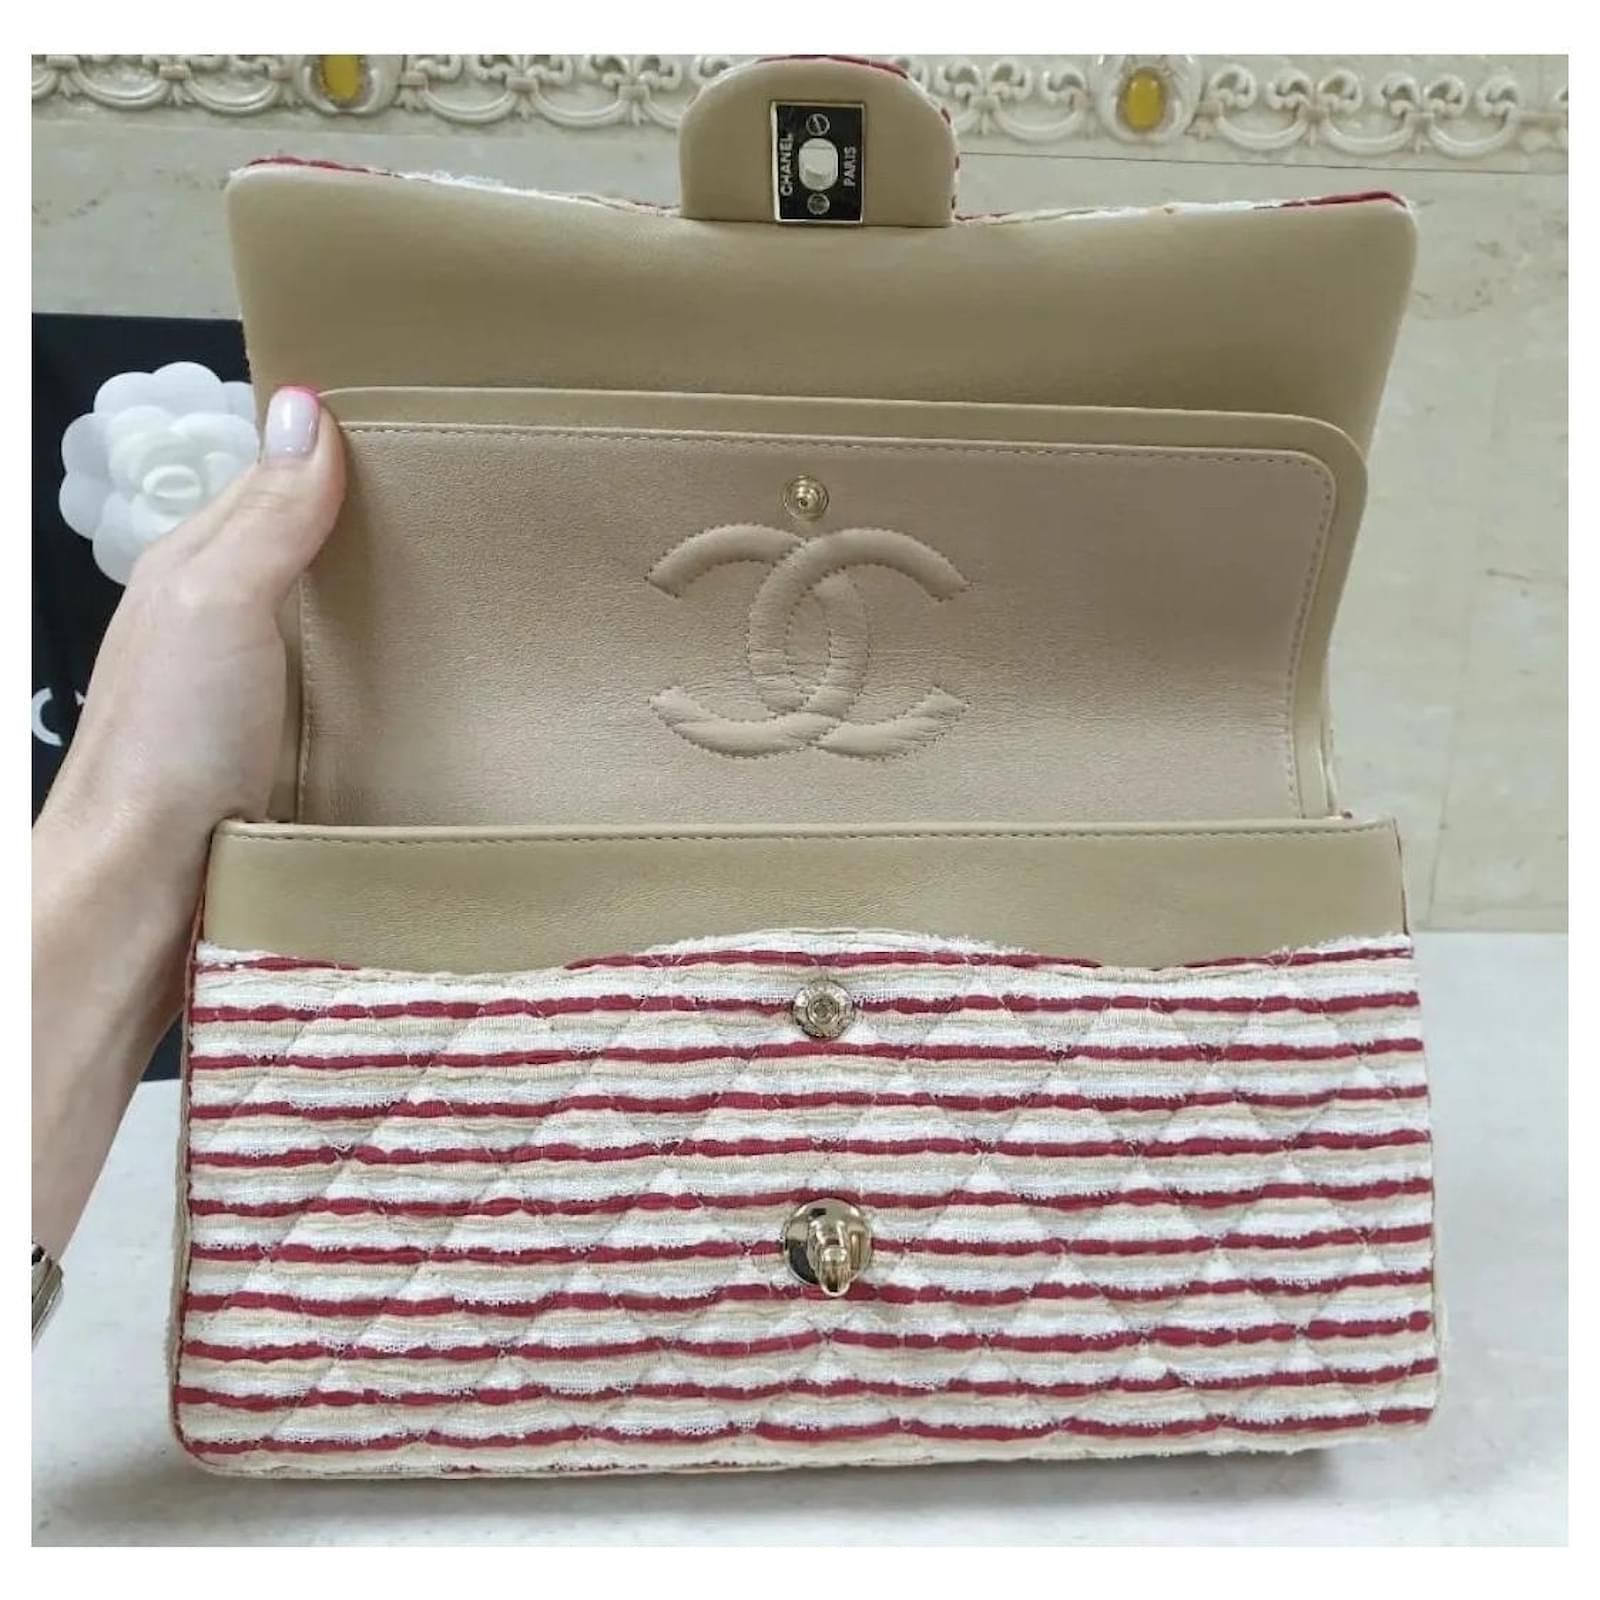 Handbags Chanel Chanel Limited Edition Coco Sailor Classic Lined Flap Bag